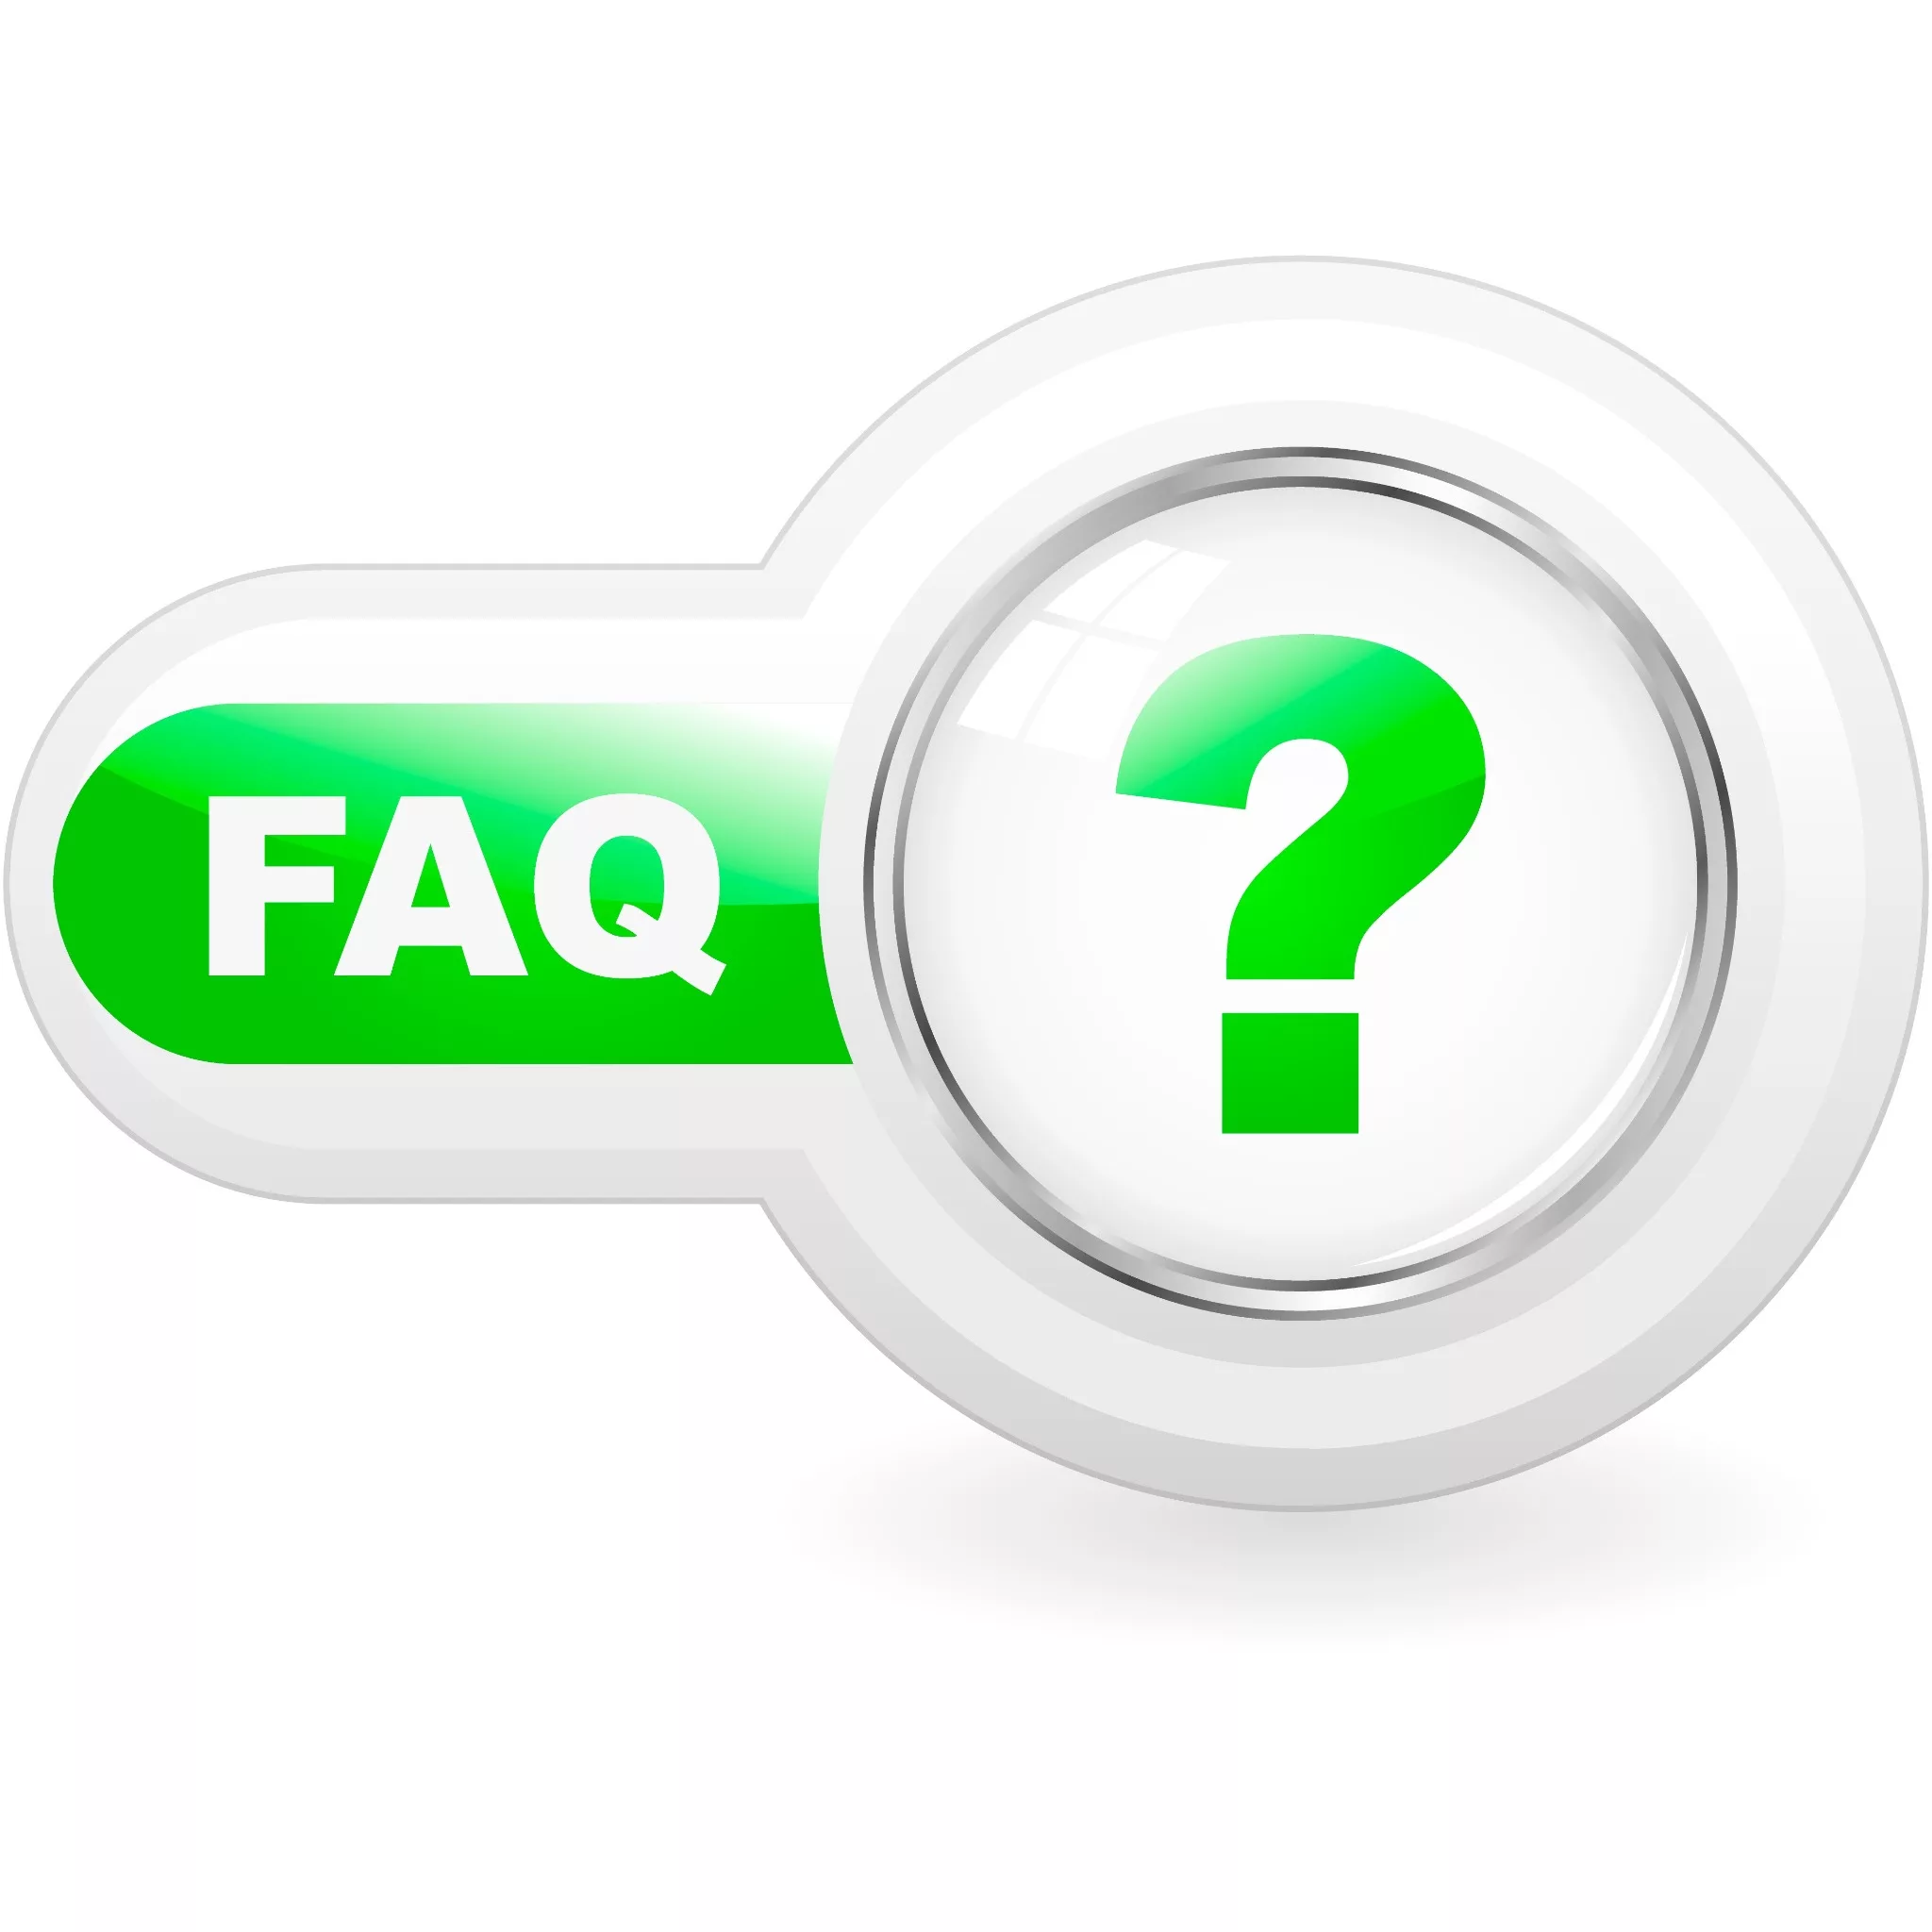 Frequently Asked Questions When Looking for a New Dentist